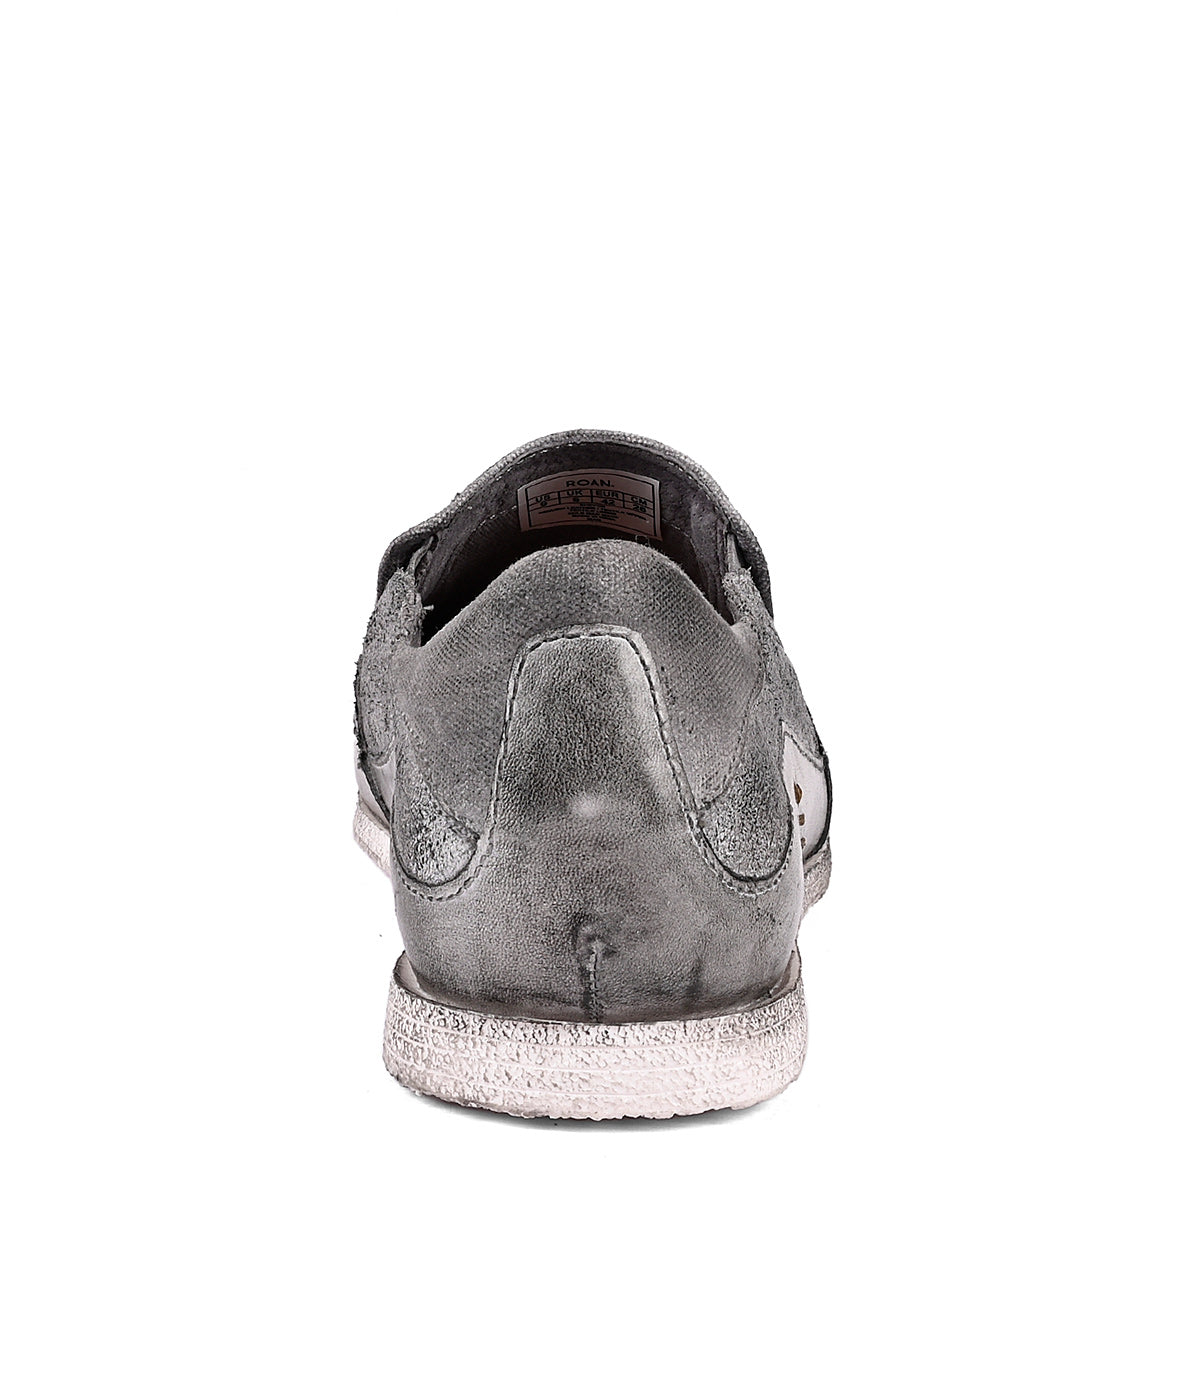 
                  
                    Rear view of a single Roan Shevon grey leather slip-on sneaker isolated on a white background.
                  
                